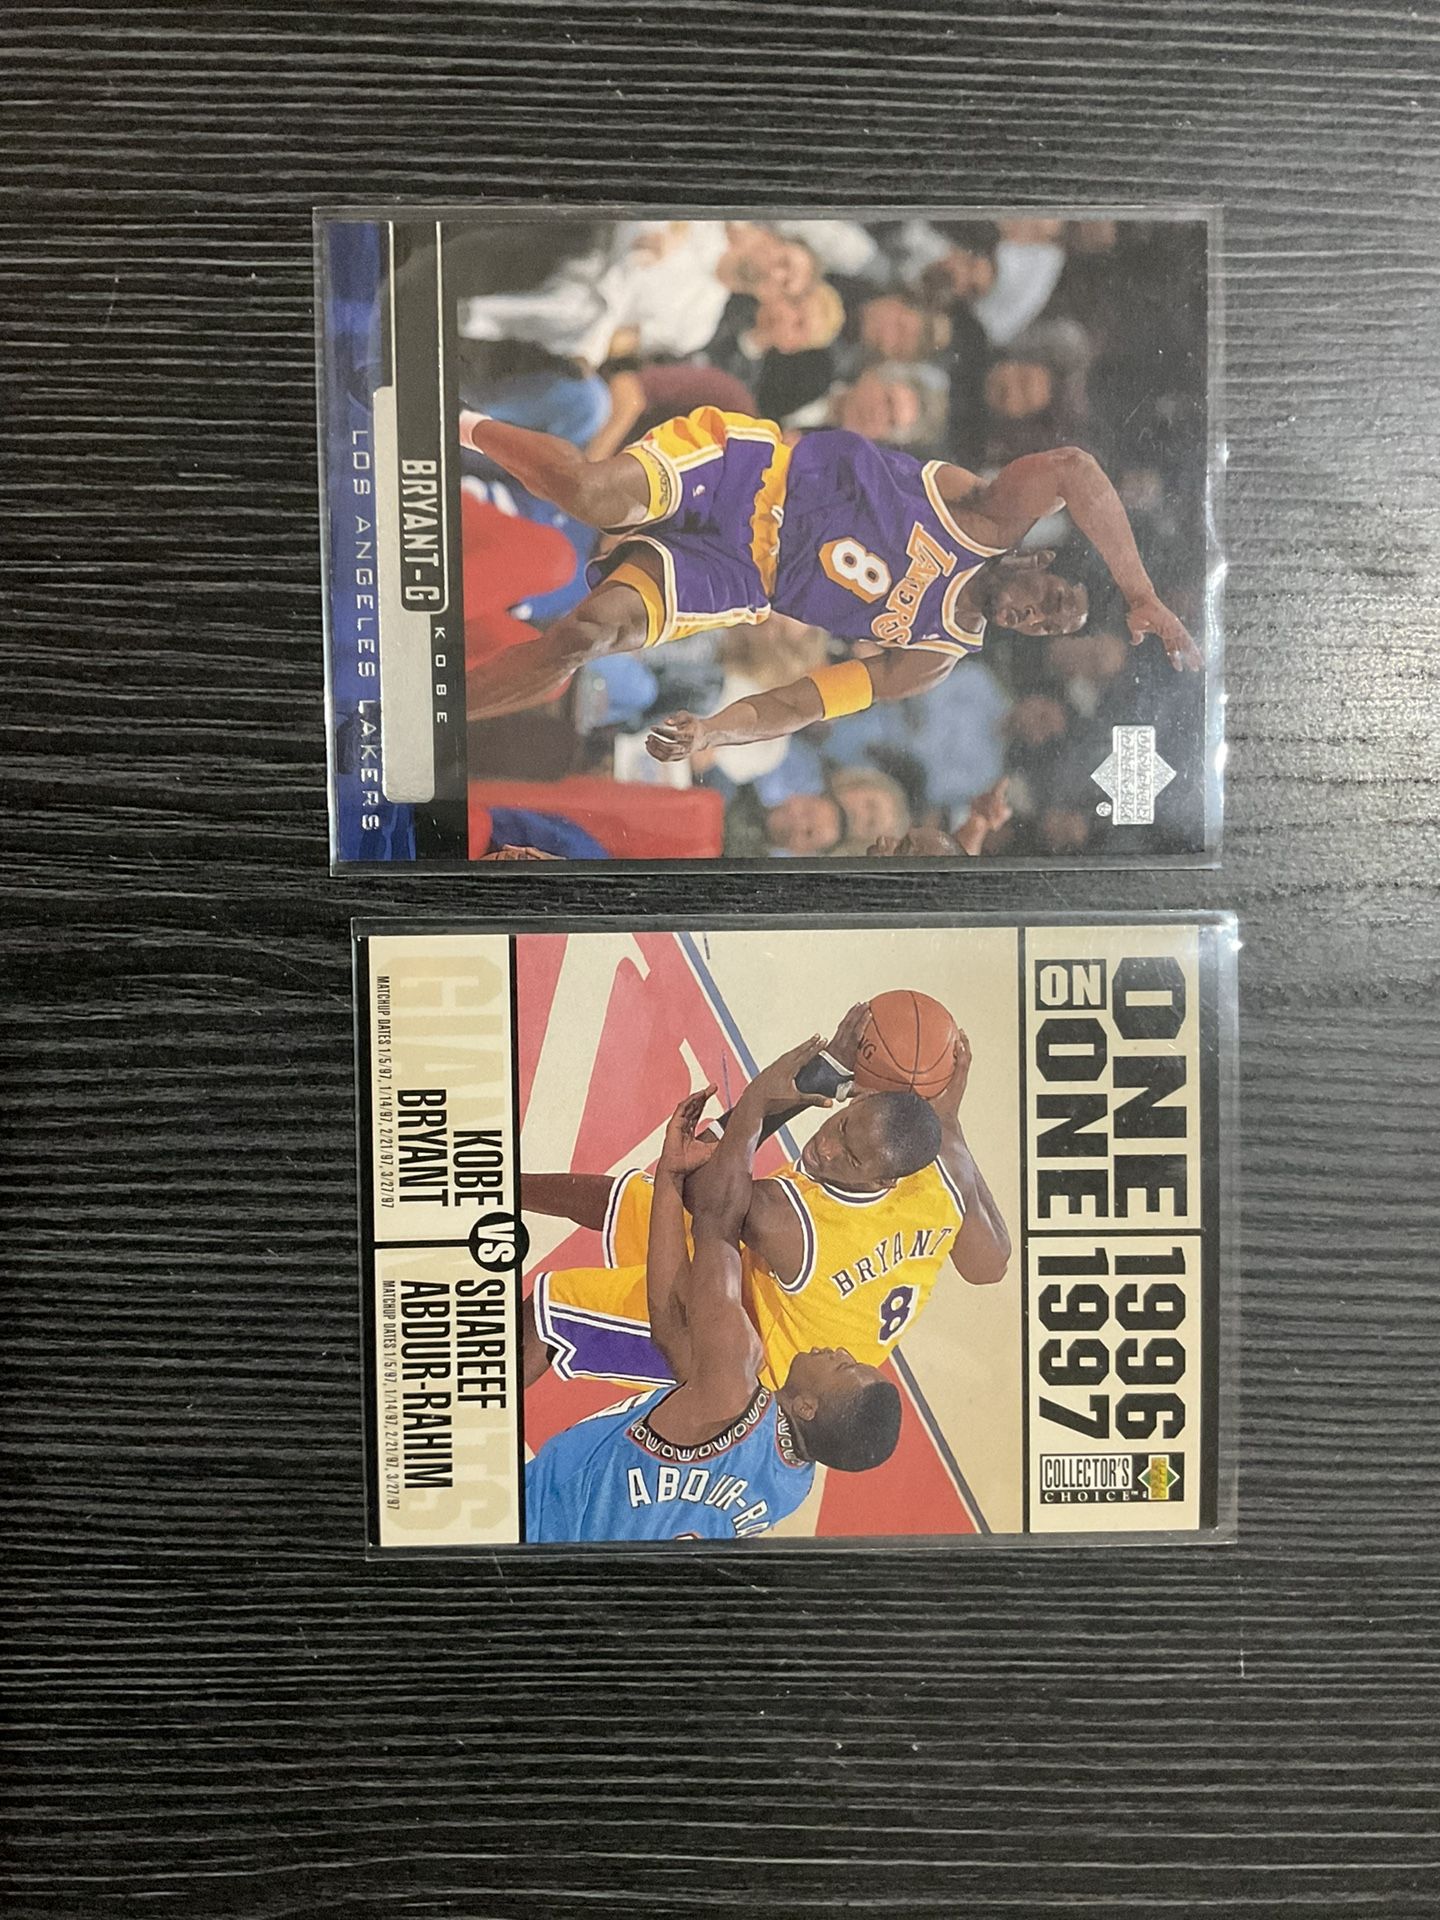 2 Kobe Bryant Basketball Cards With 1996 Rookie Year Card Los Angeles Lakers Legend 